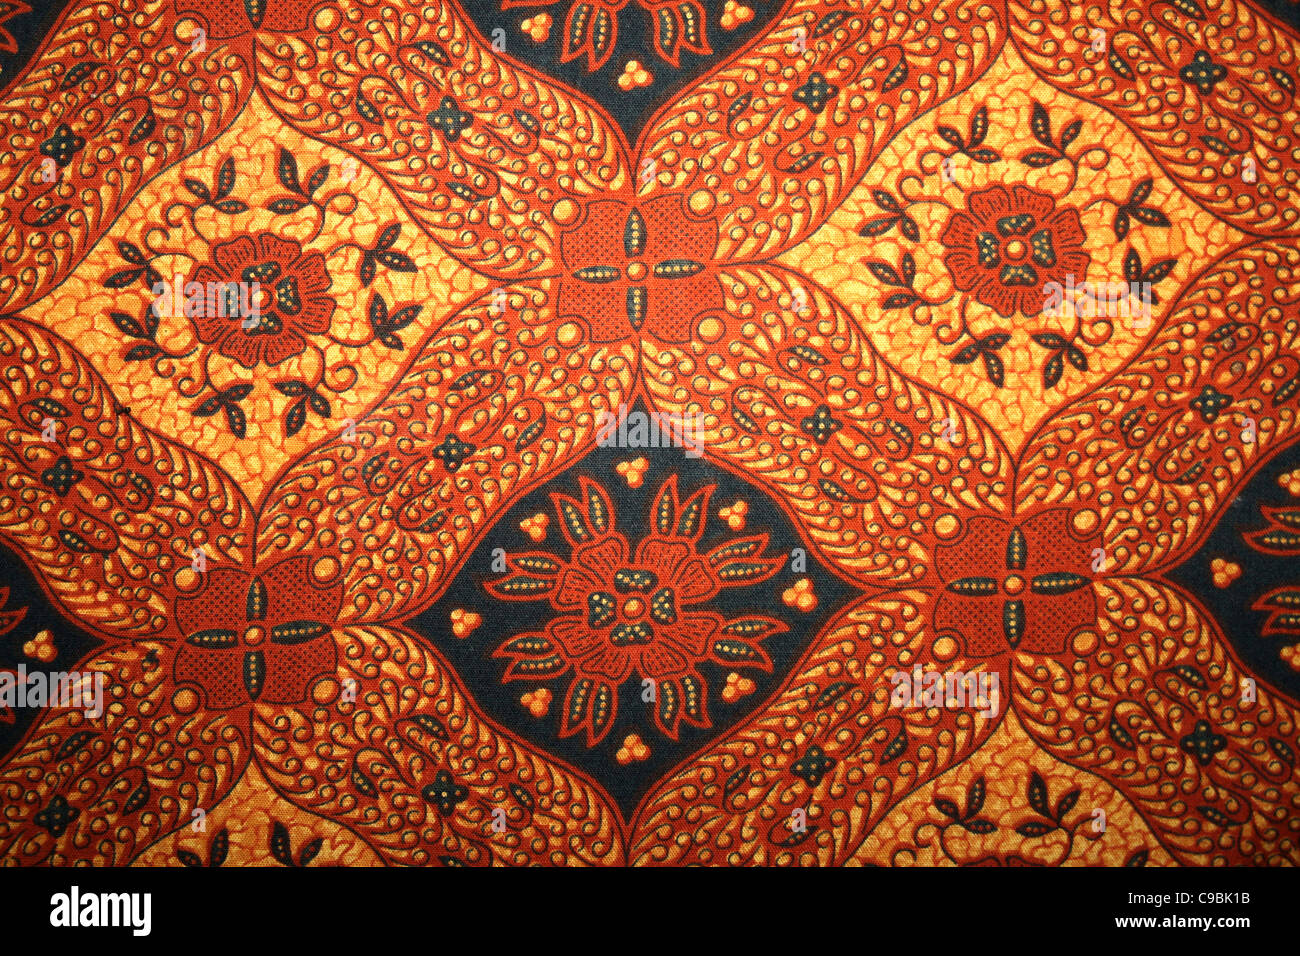 Traditional Batik Work From Indonesia Stock Photo